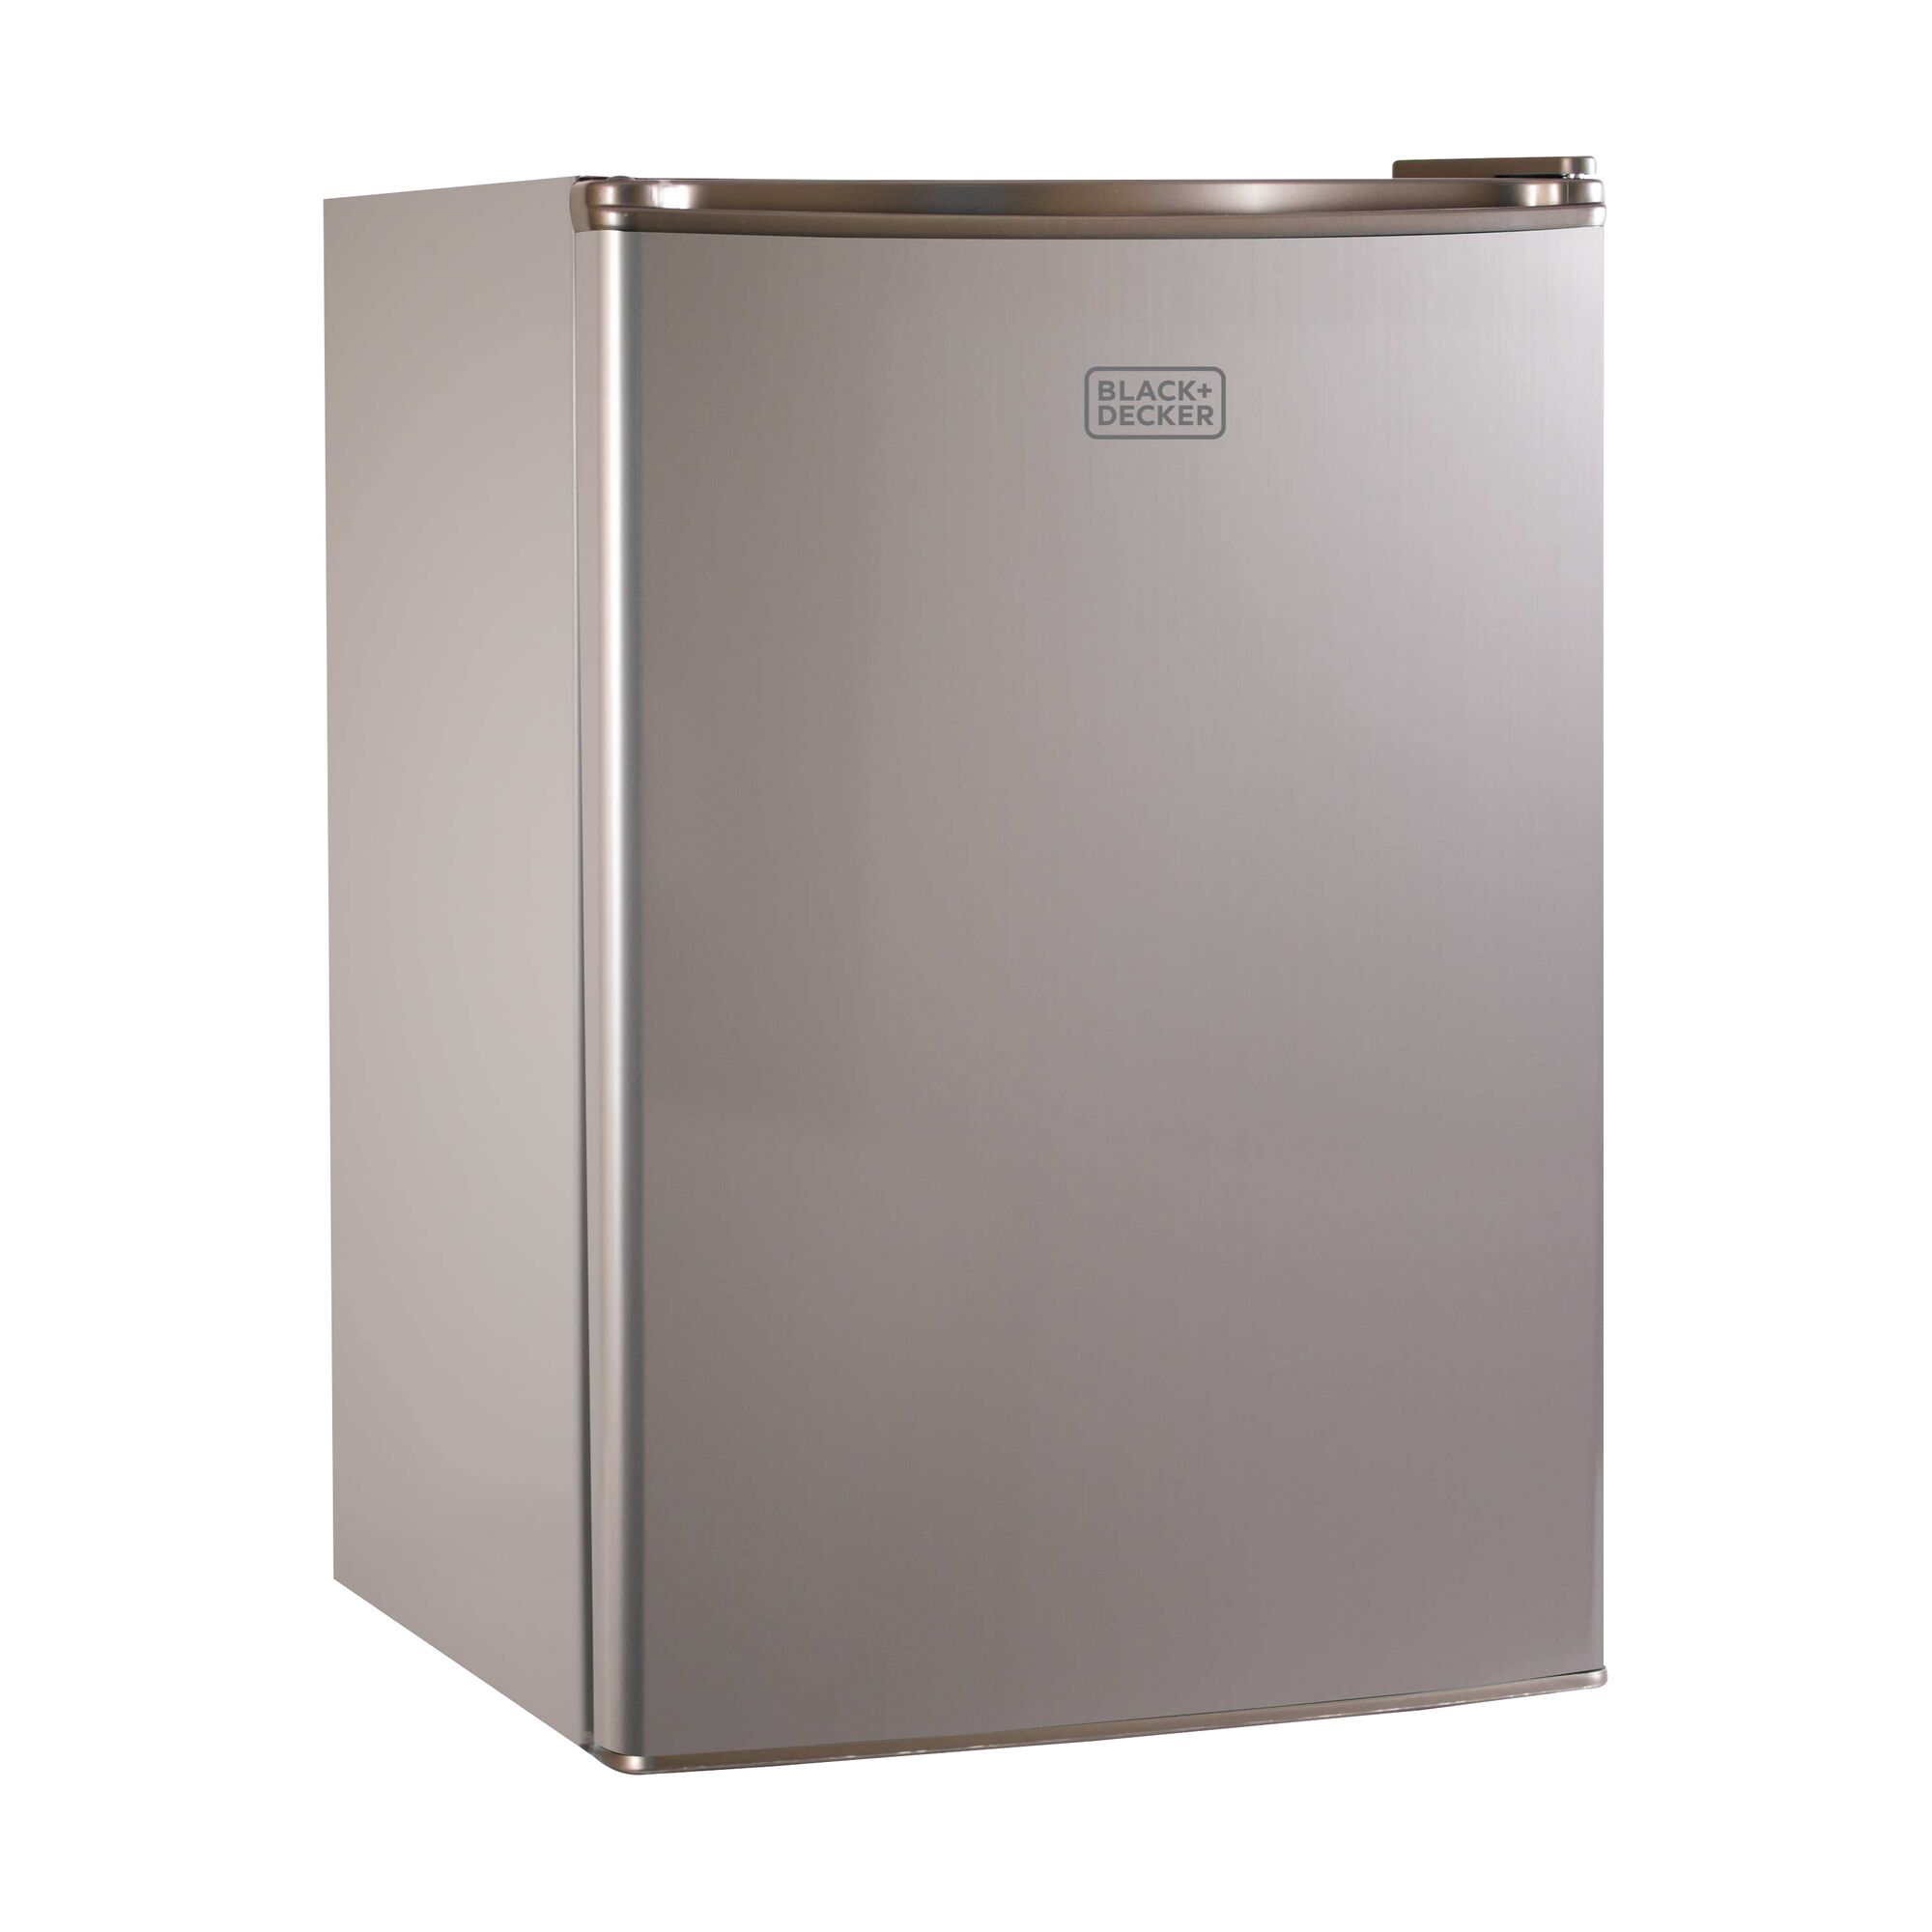 Profile of a 2 point 5 cubic feet energy star refrigerator with freezer.